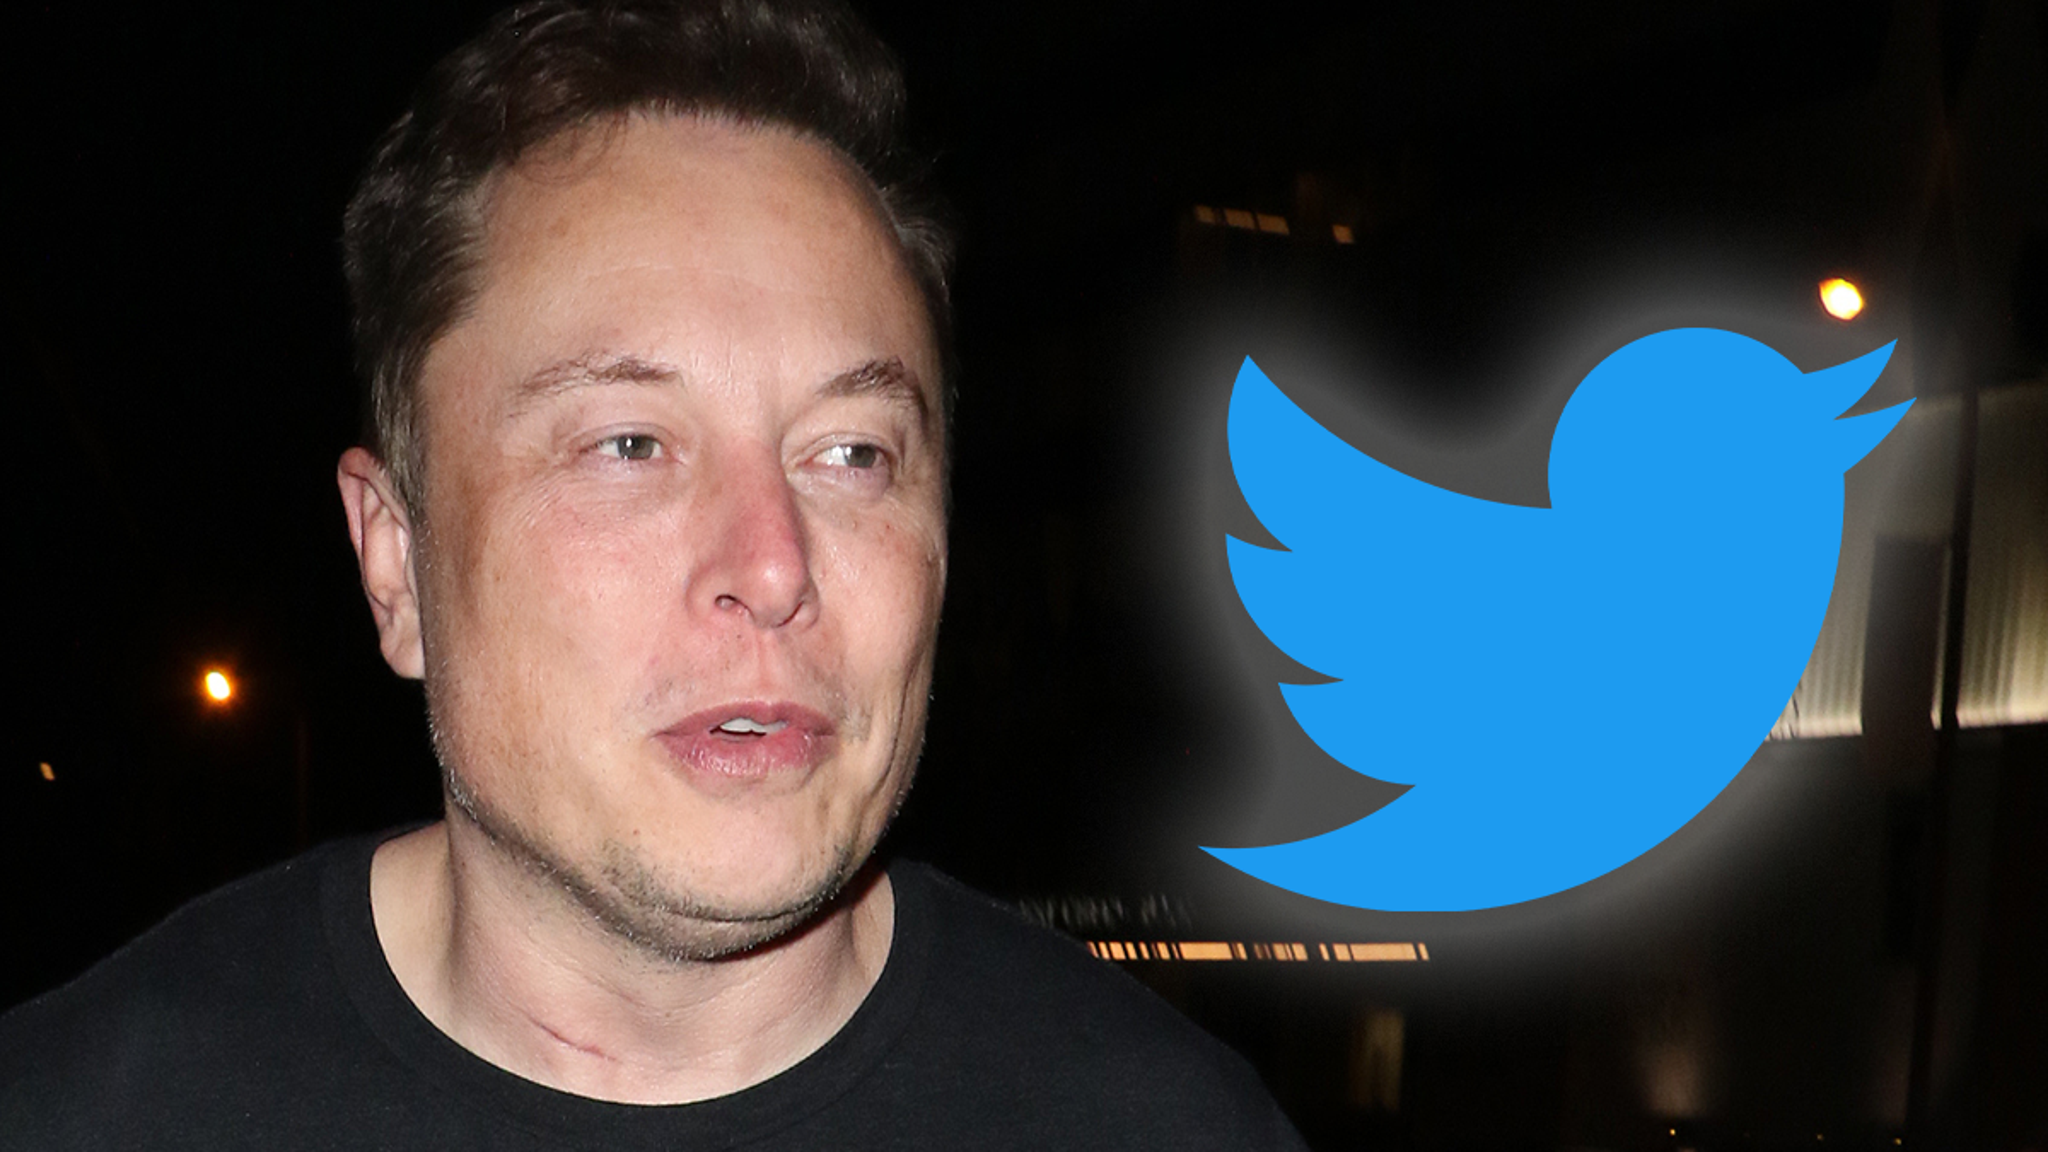 Elon Musk says Twitter is worth less than half of what he bought it for